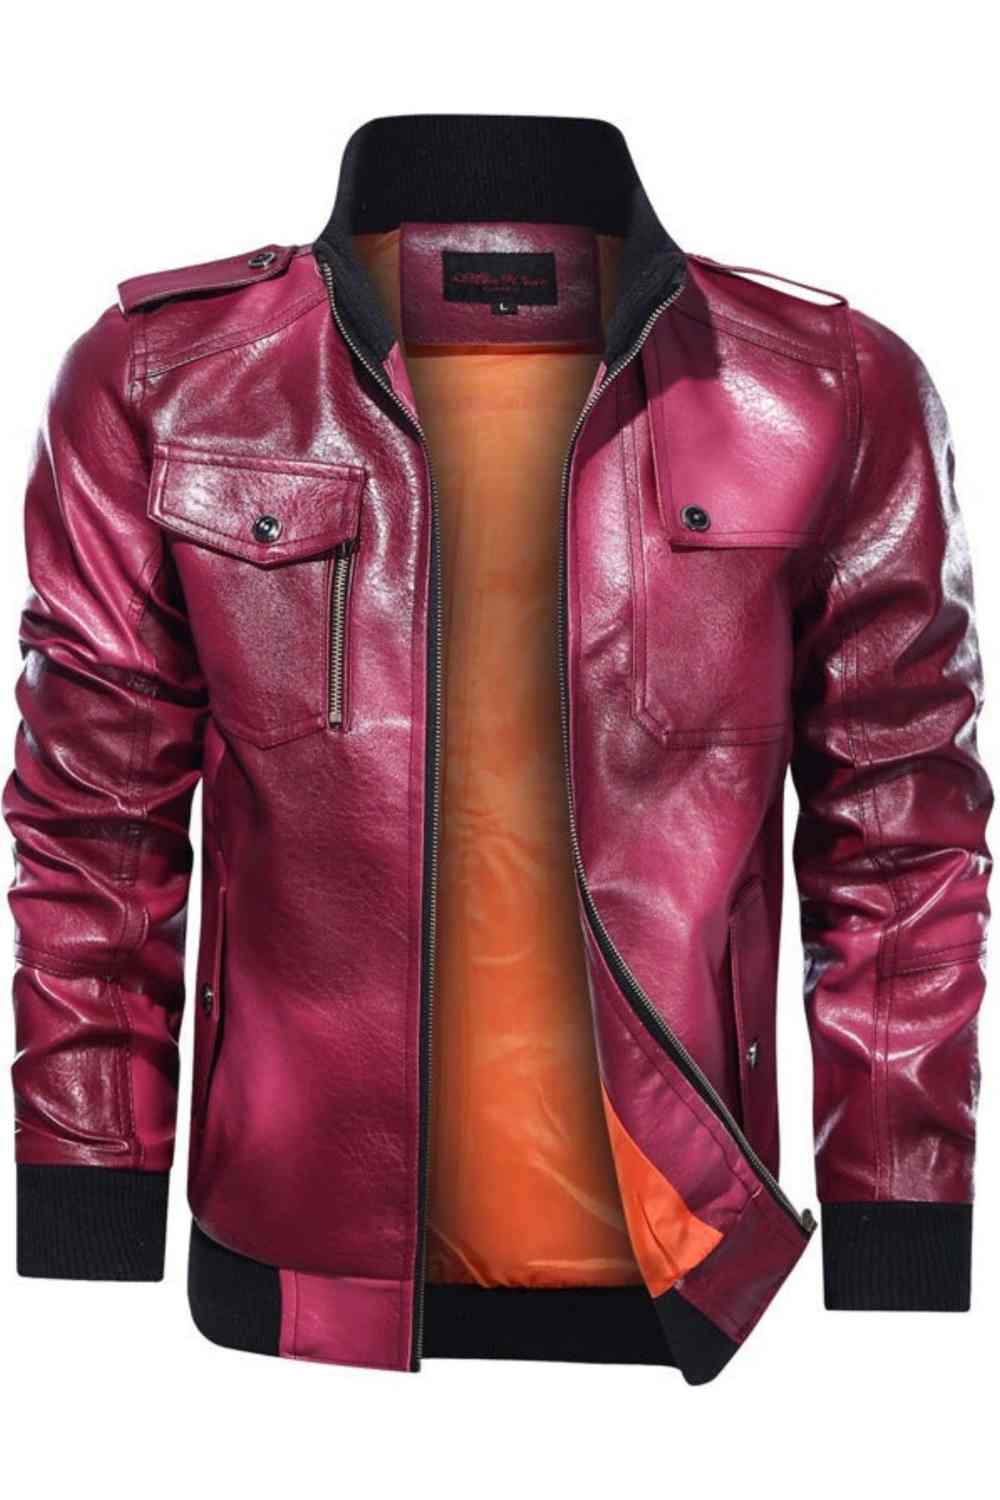 Men's Red Leather Jacket - Bold and Elegant Style for Adults - A.A.Y FASHION